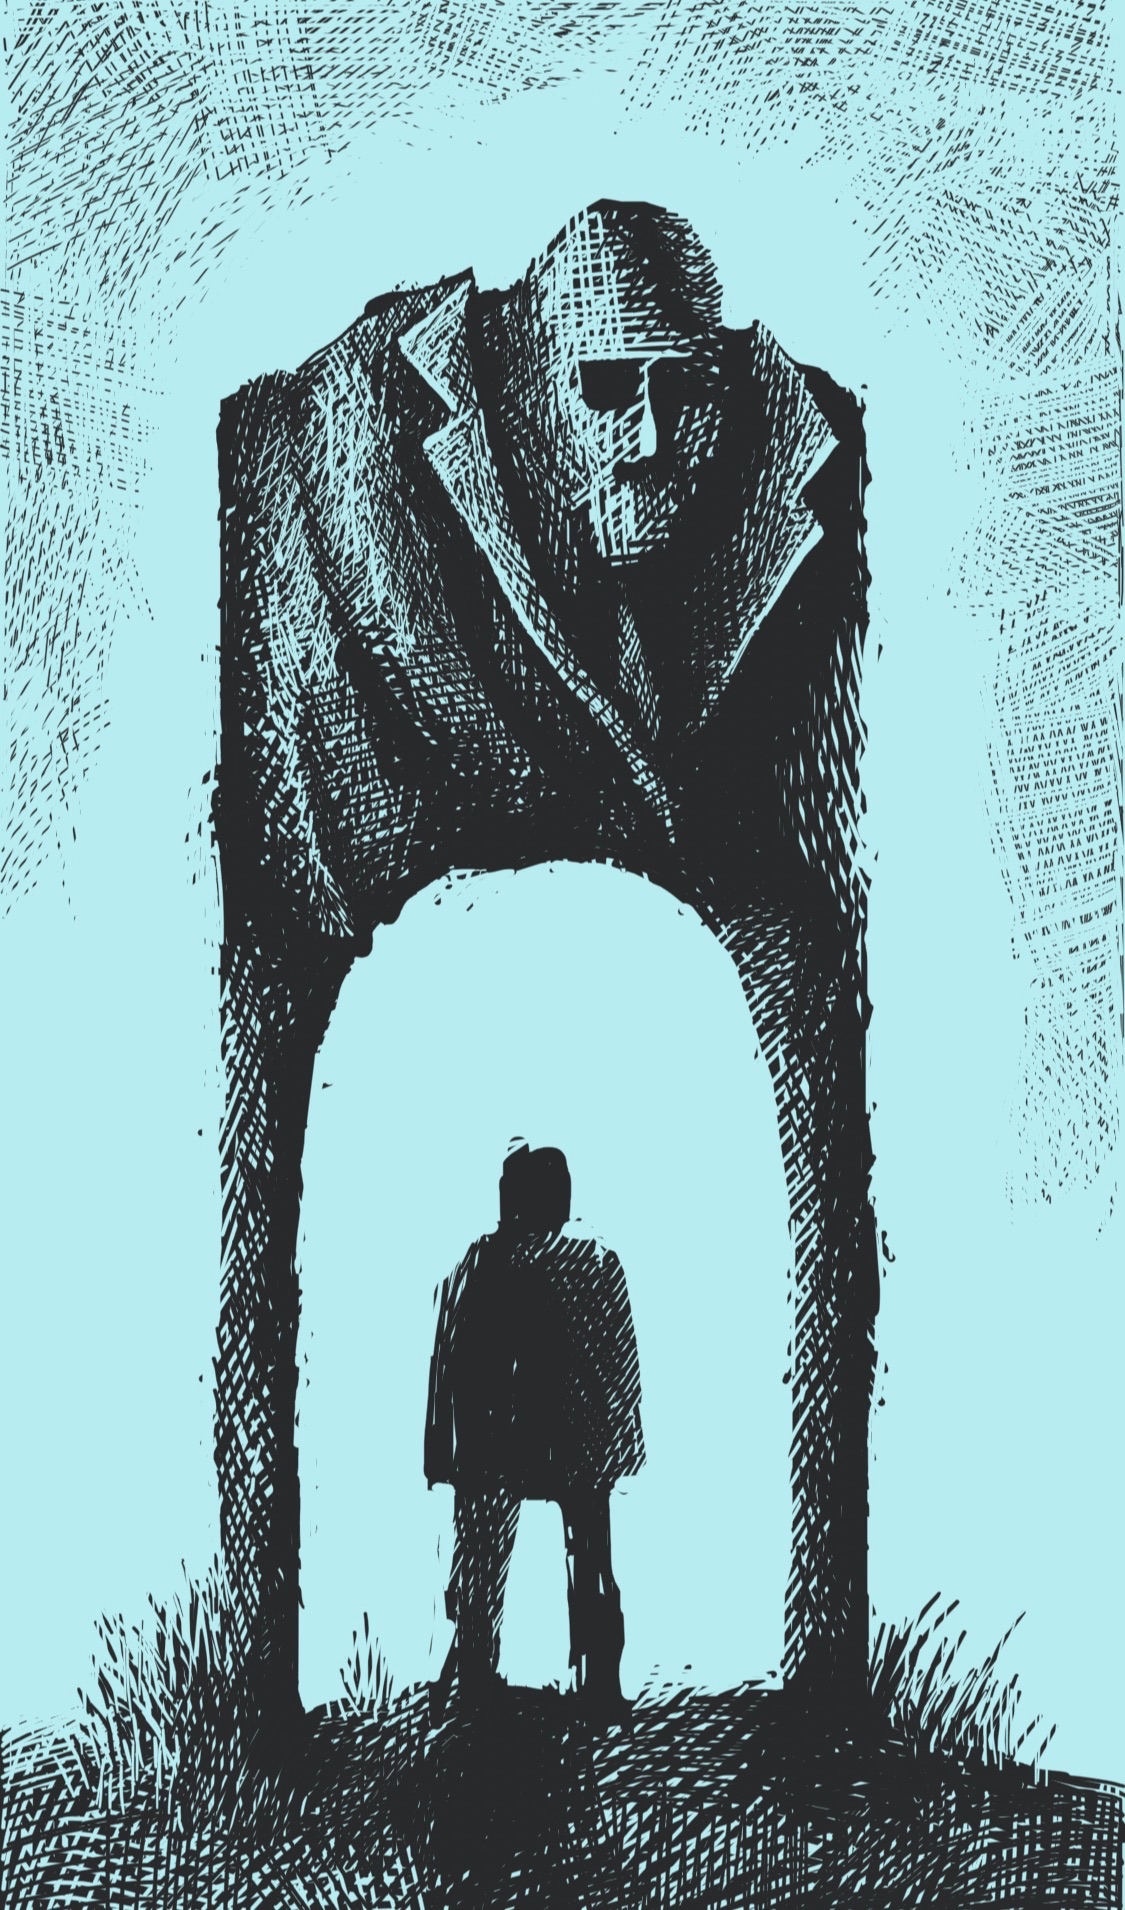 A large person with a suit coat stands, legs forming an archway under which a smaller person stands